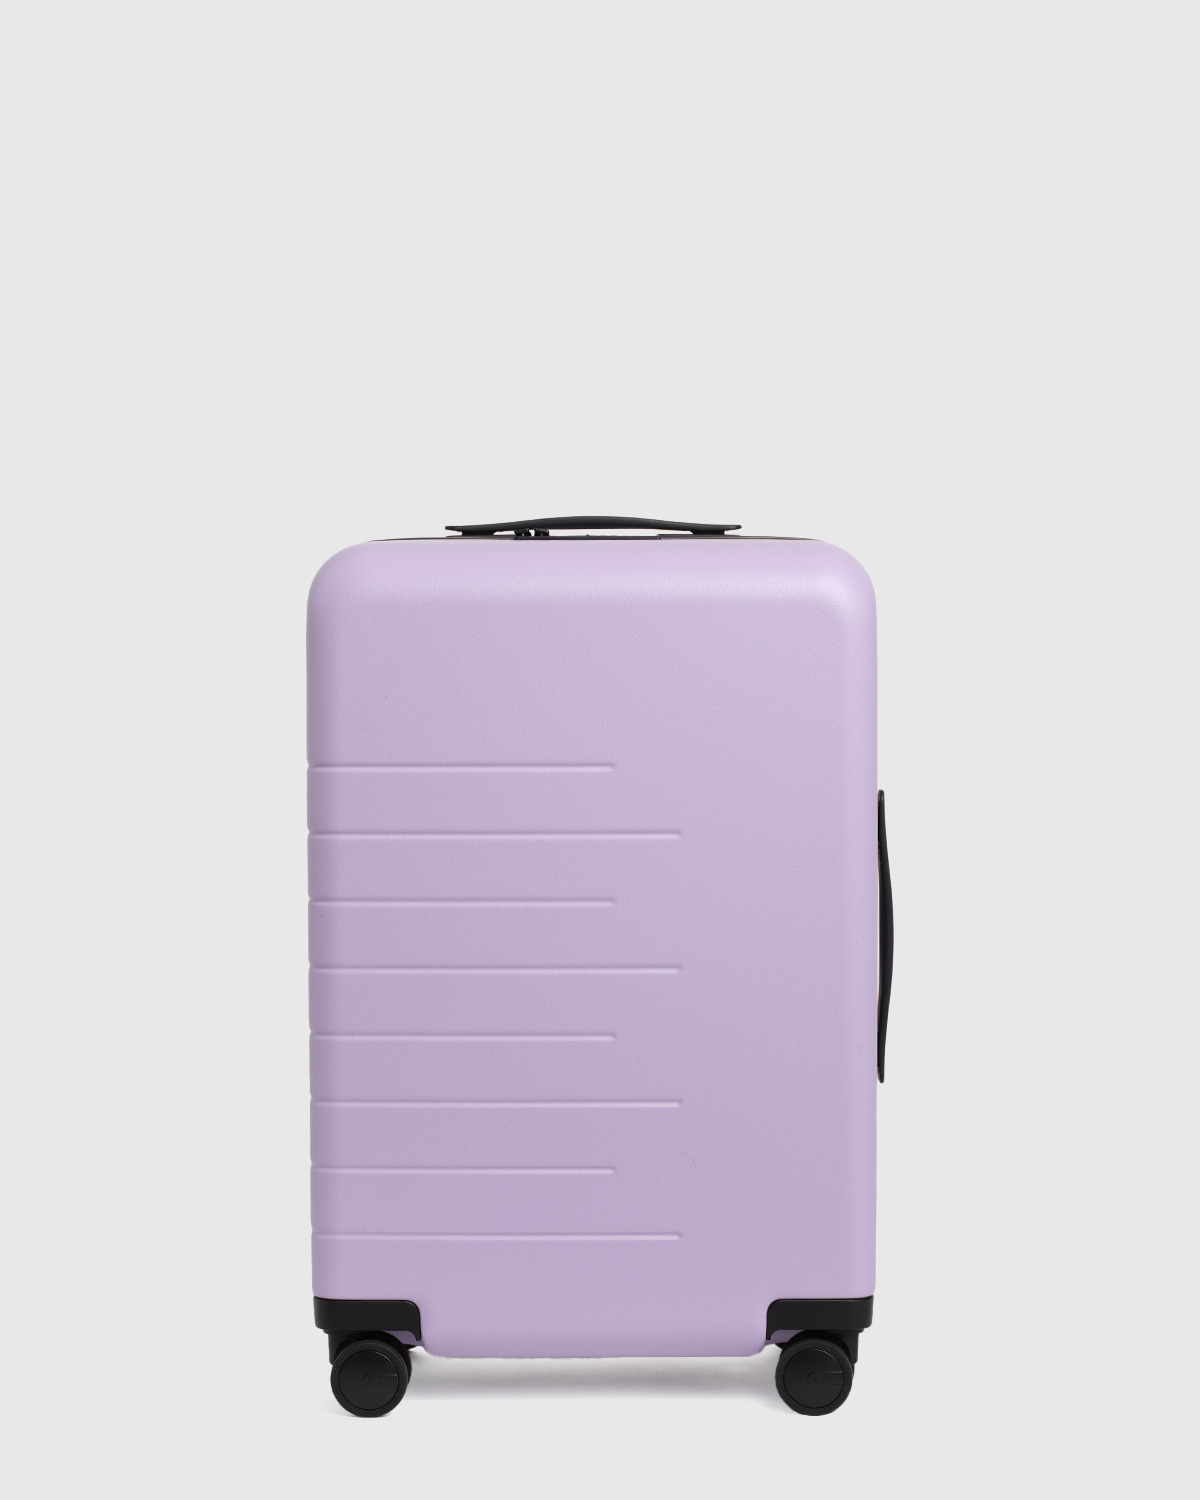 Quince Carry-on Hard Shell Suitcase 21" In Lavender